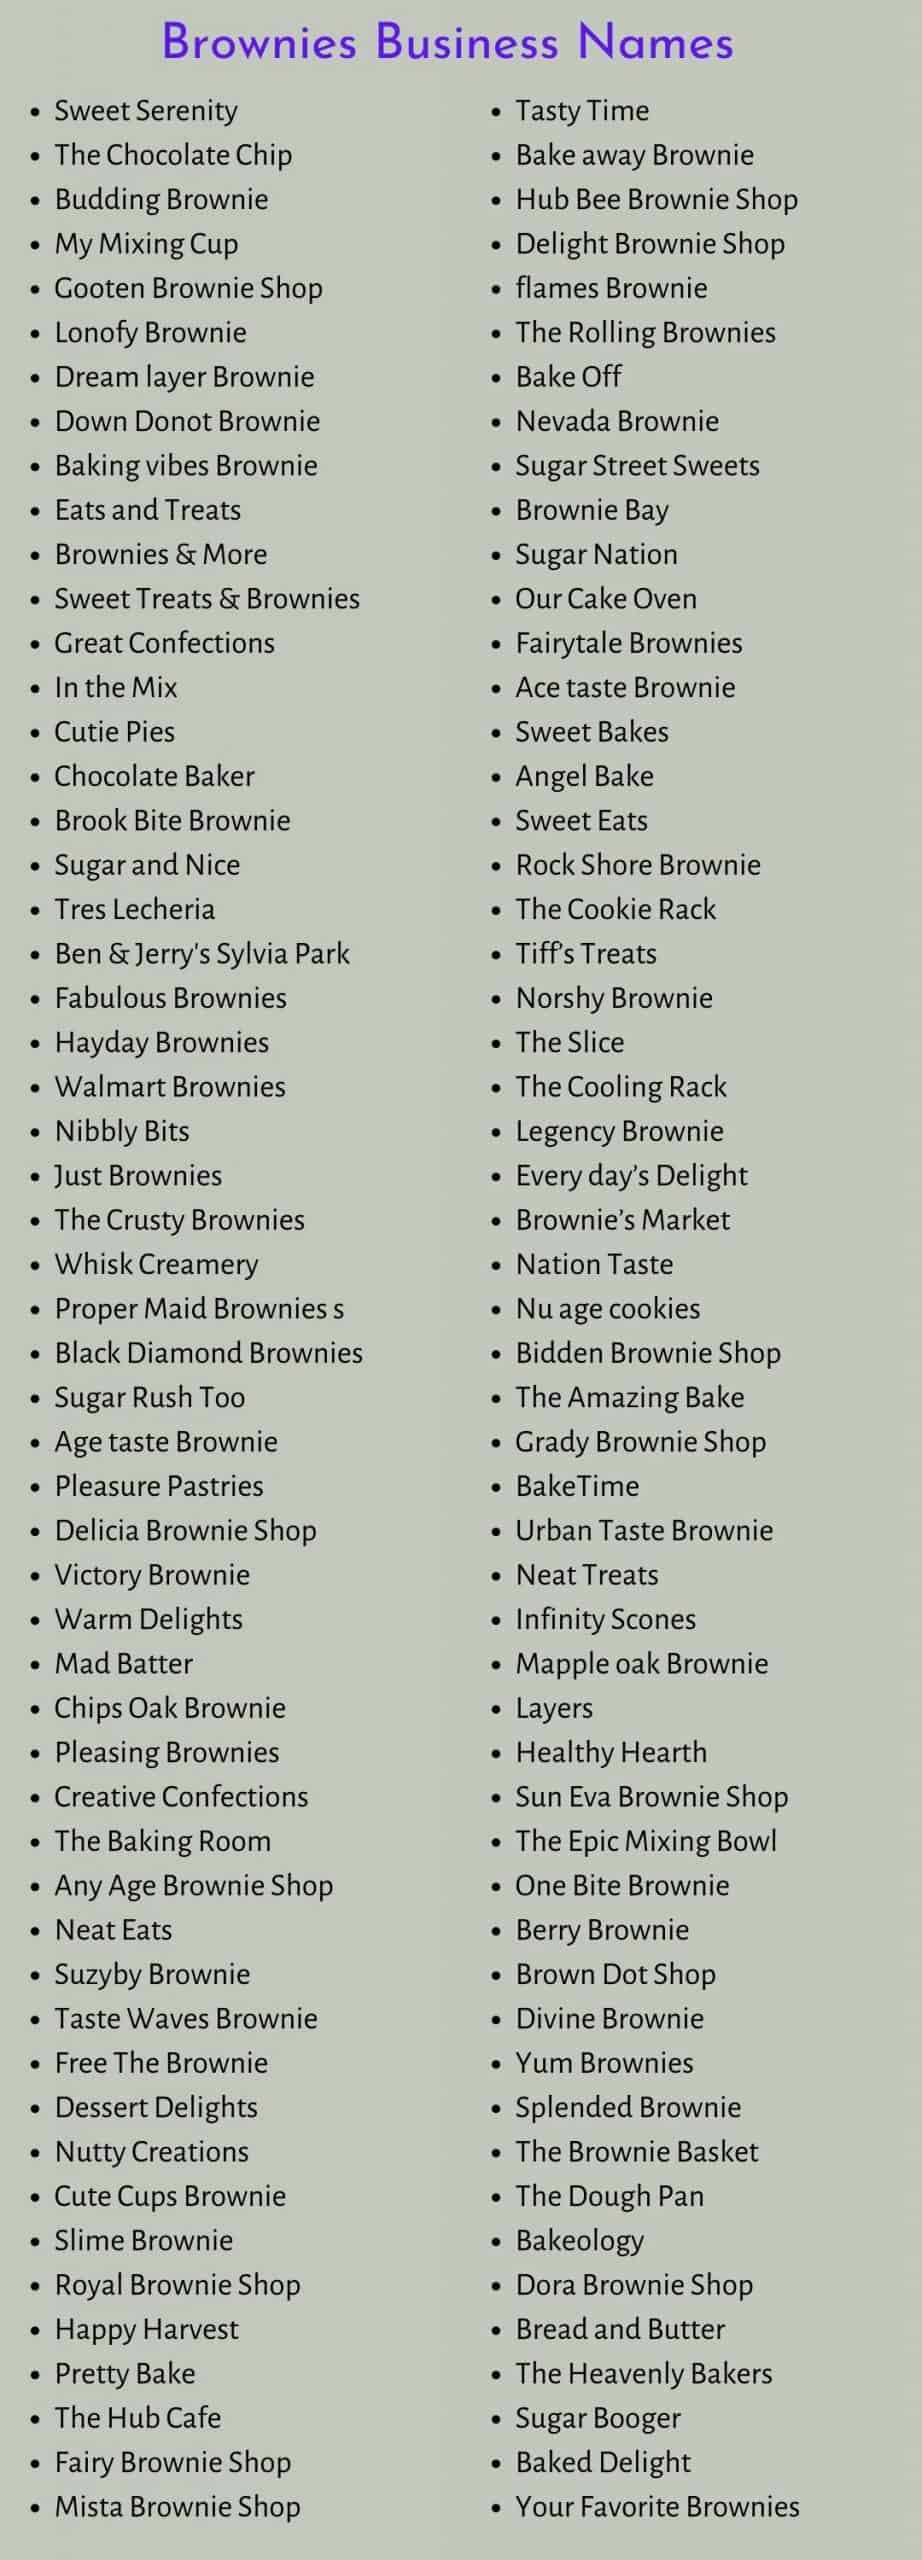 Names for Brownies